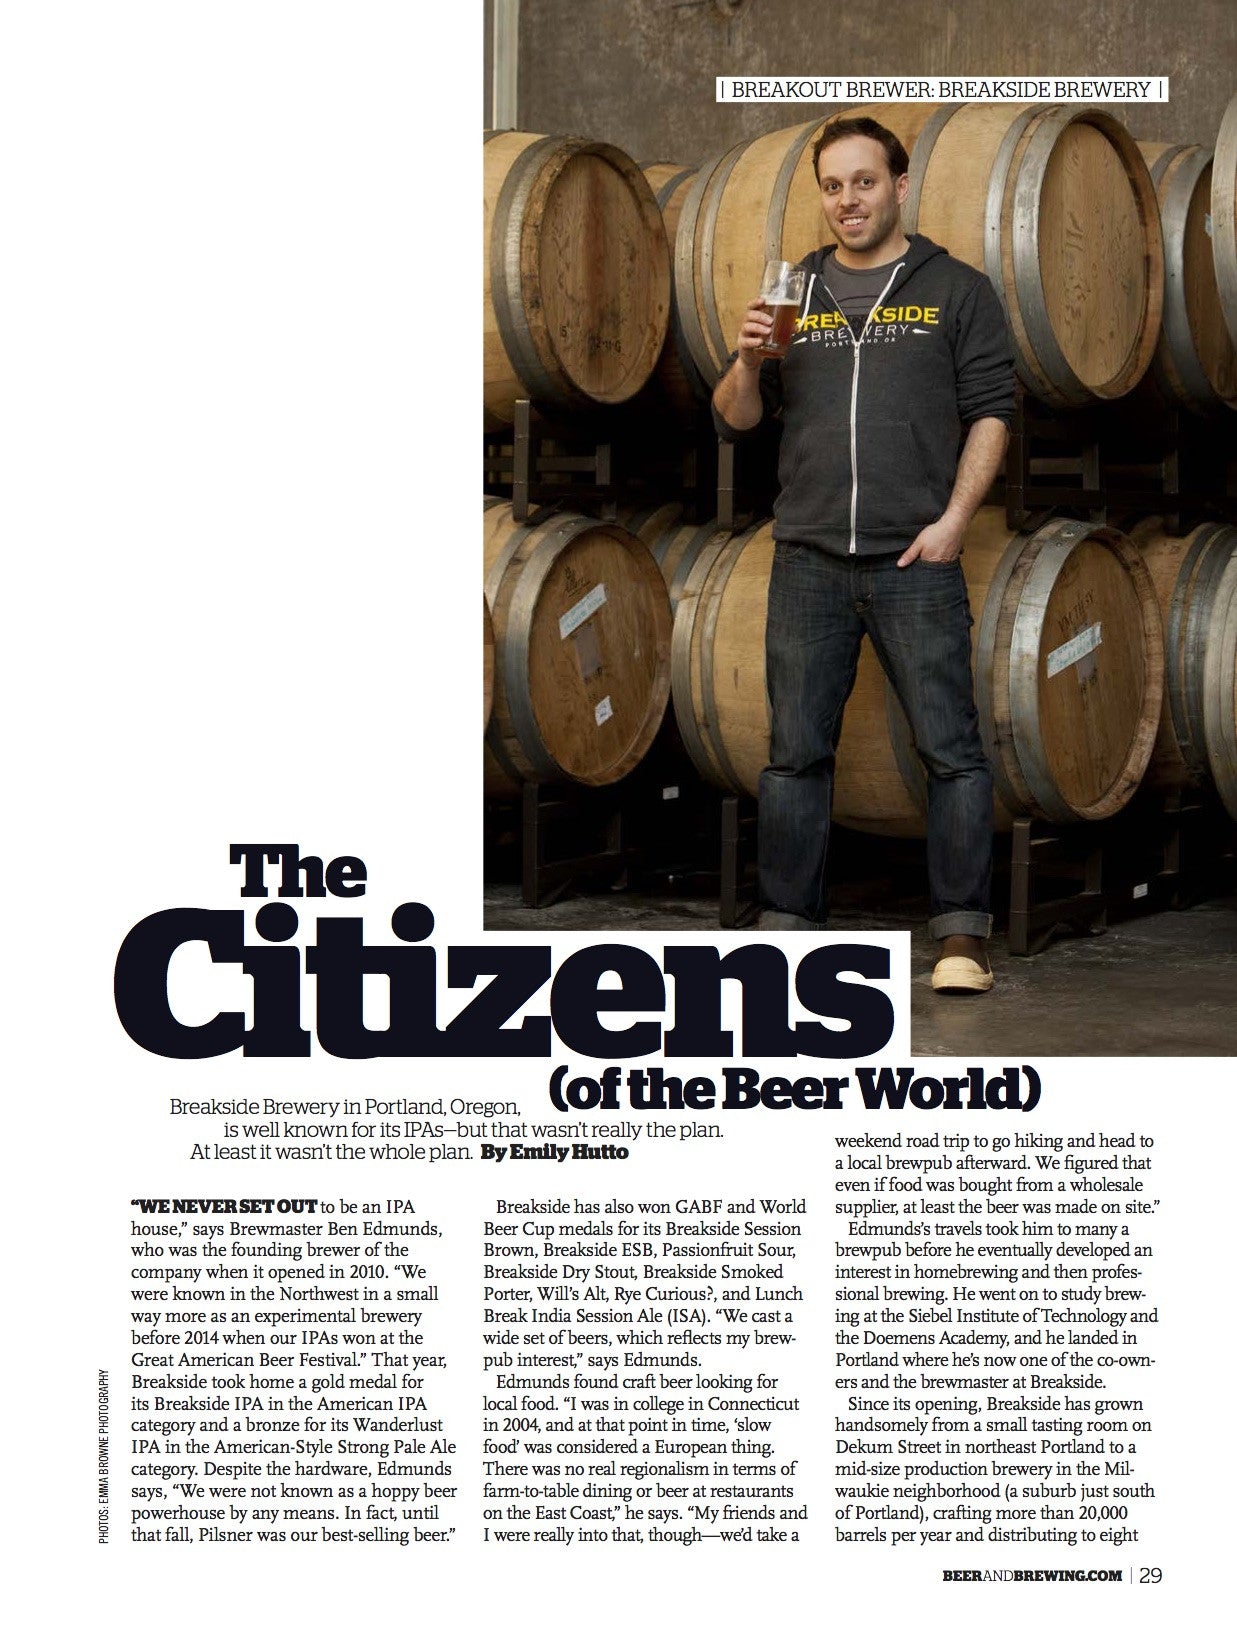 December 2016 - January 2017 Issue (The Best of Beer) - Craft Beer & Brewing